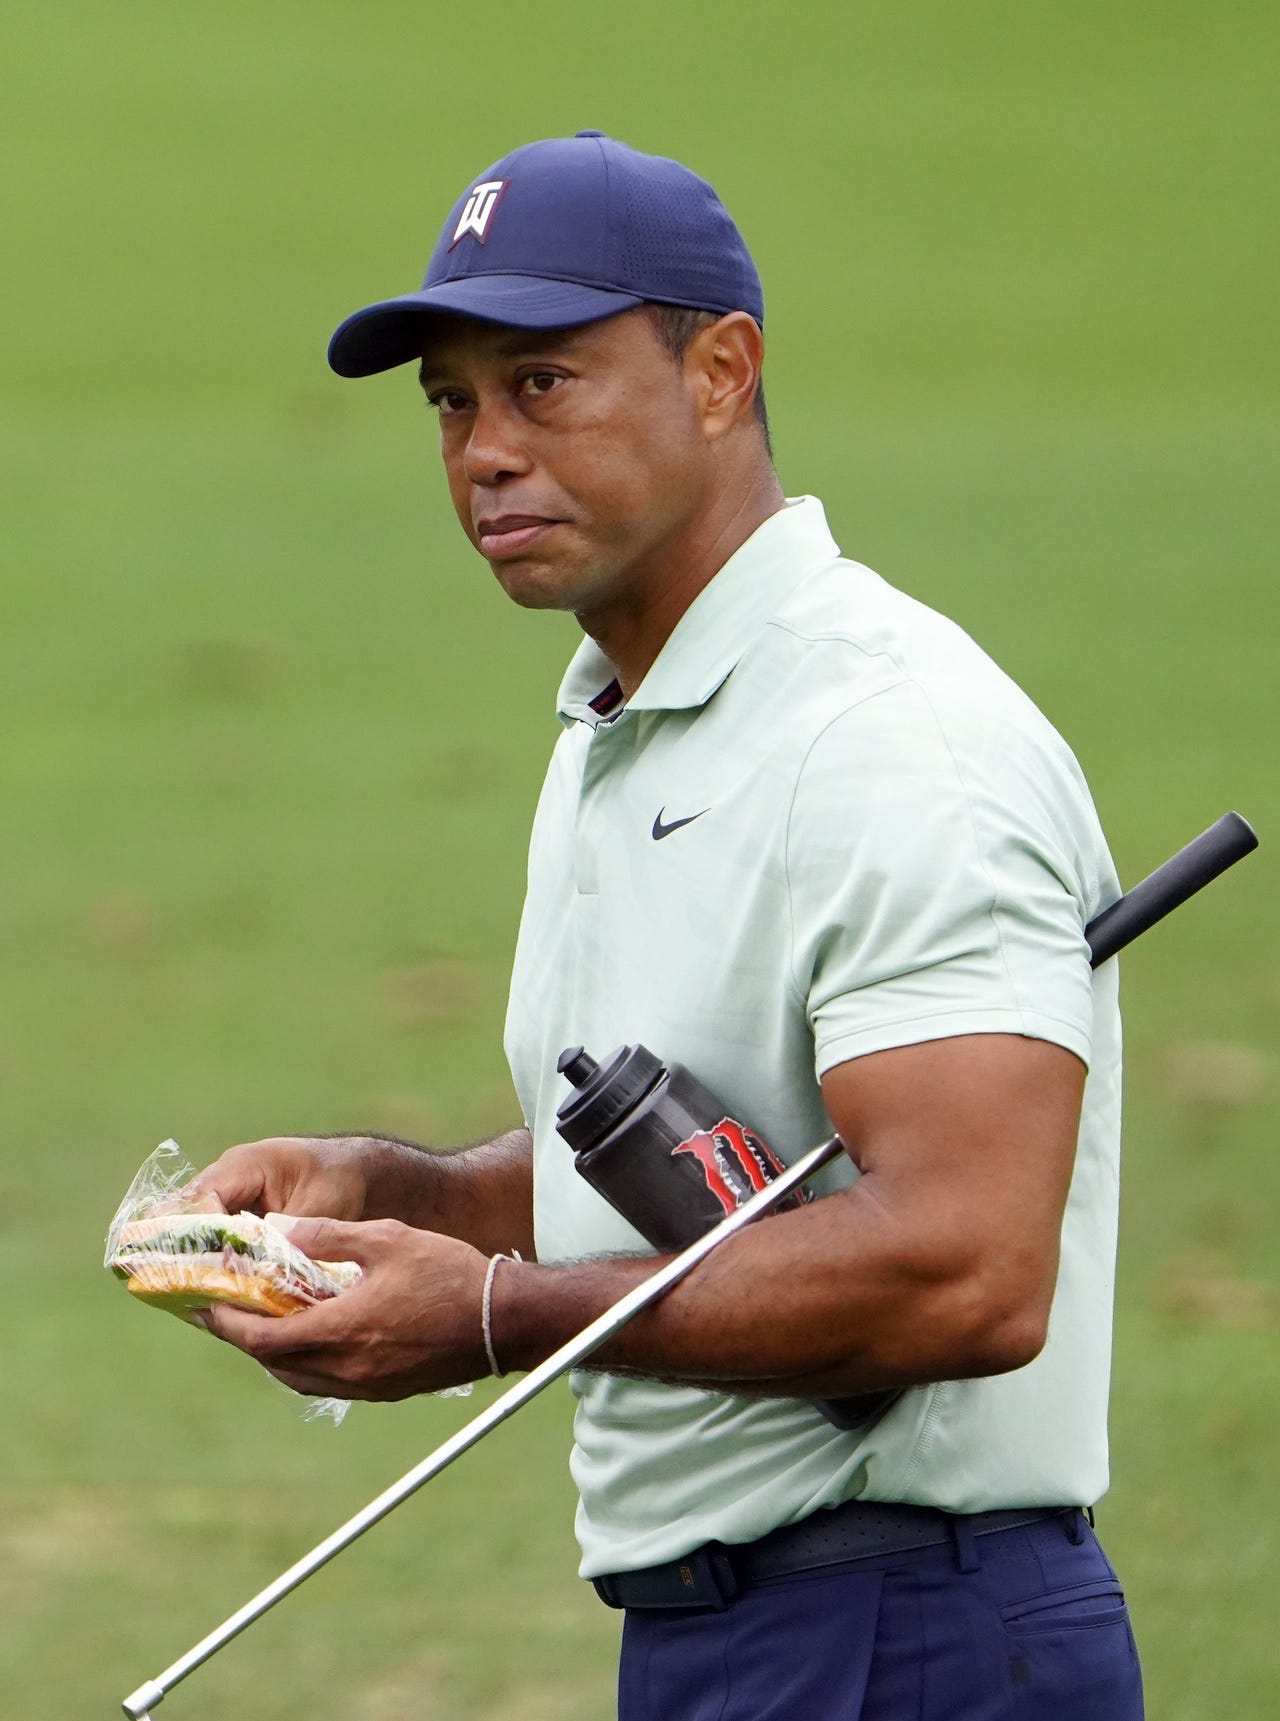 How to watch Tiger Woods at the 2022 Masters Tournament live on TV